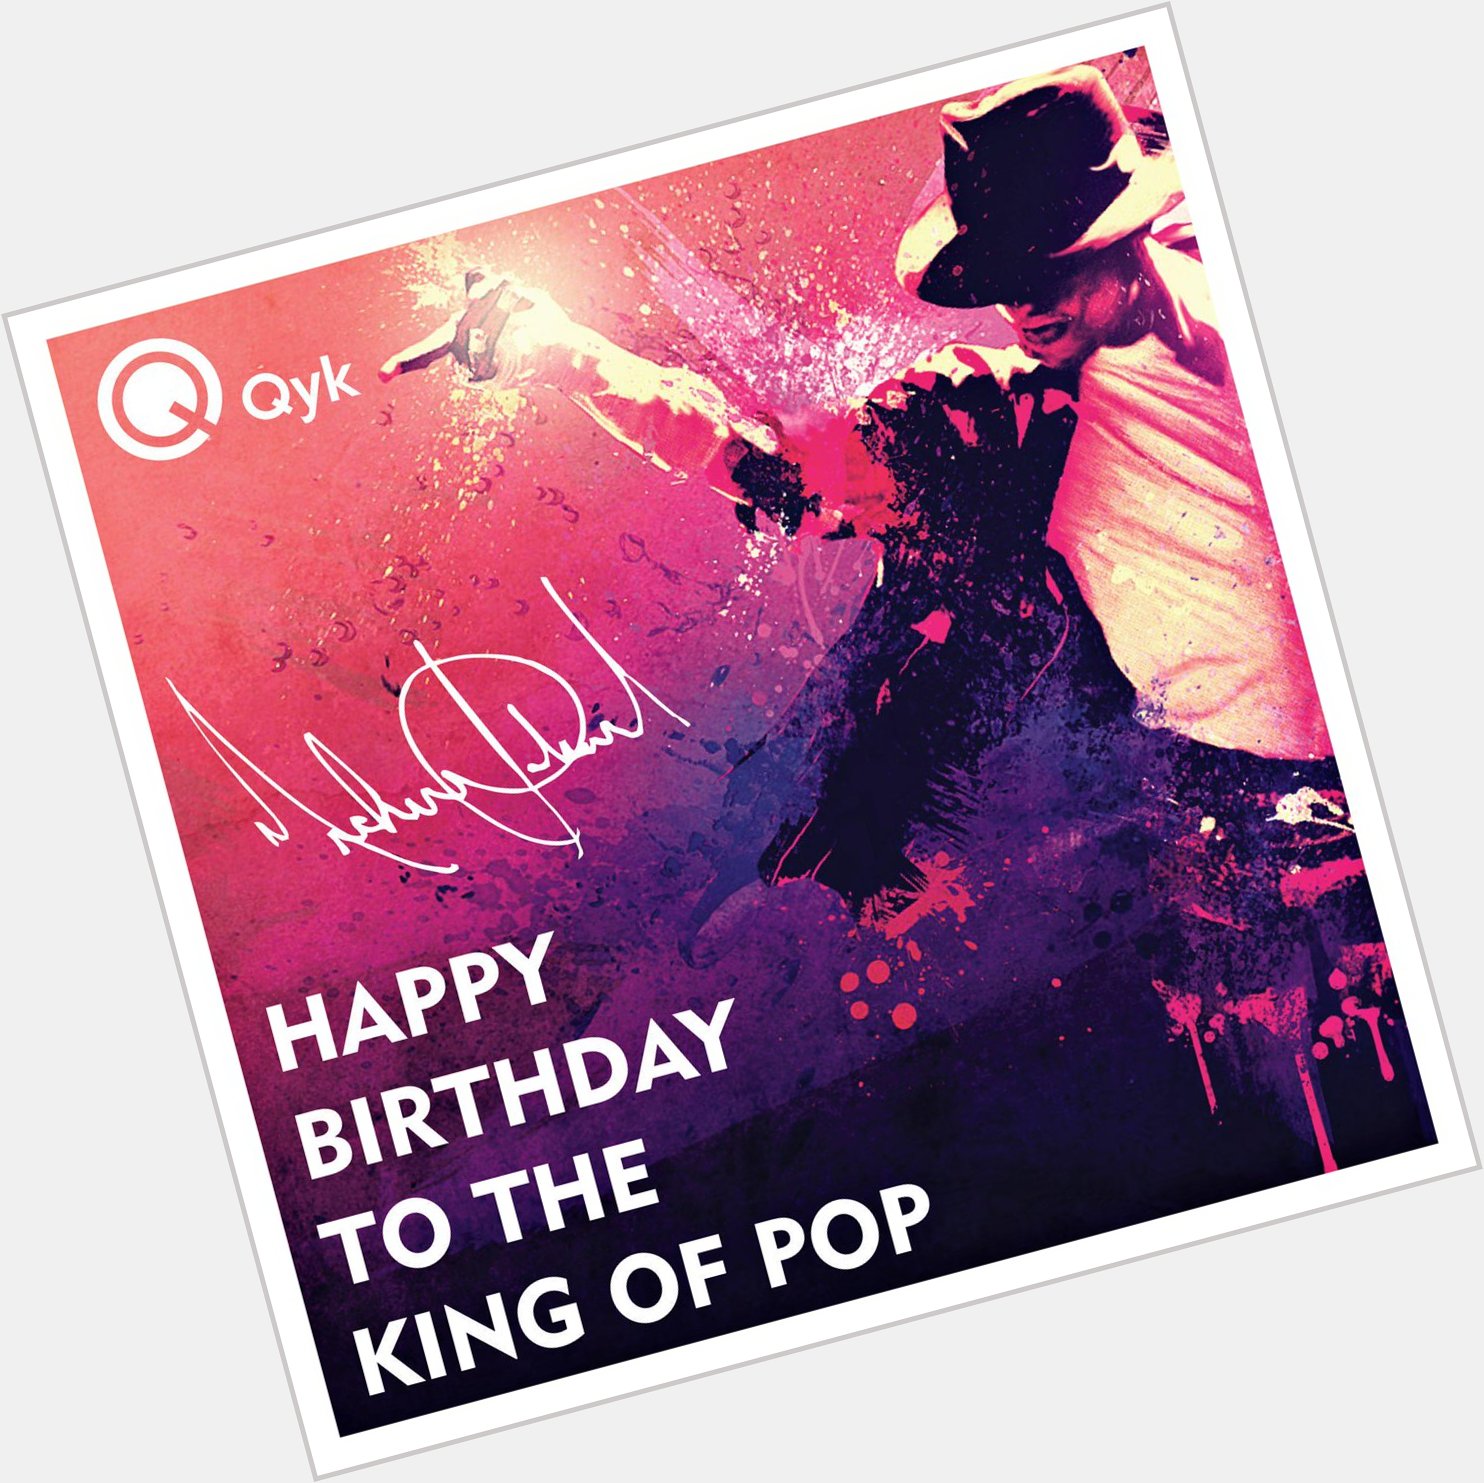 Probably the greatest performer the world has seen. A very Happy Birthday to the King of Pop, Michael Jackson! 